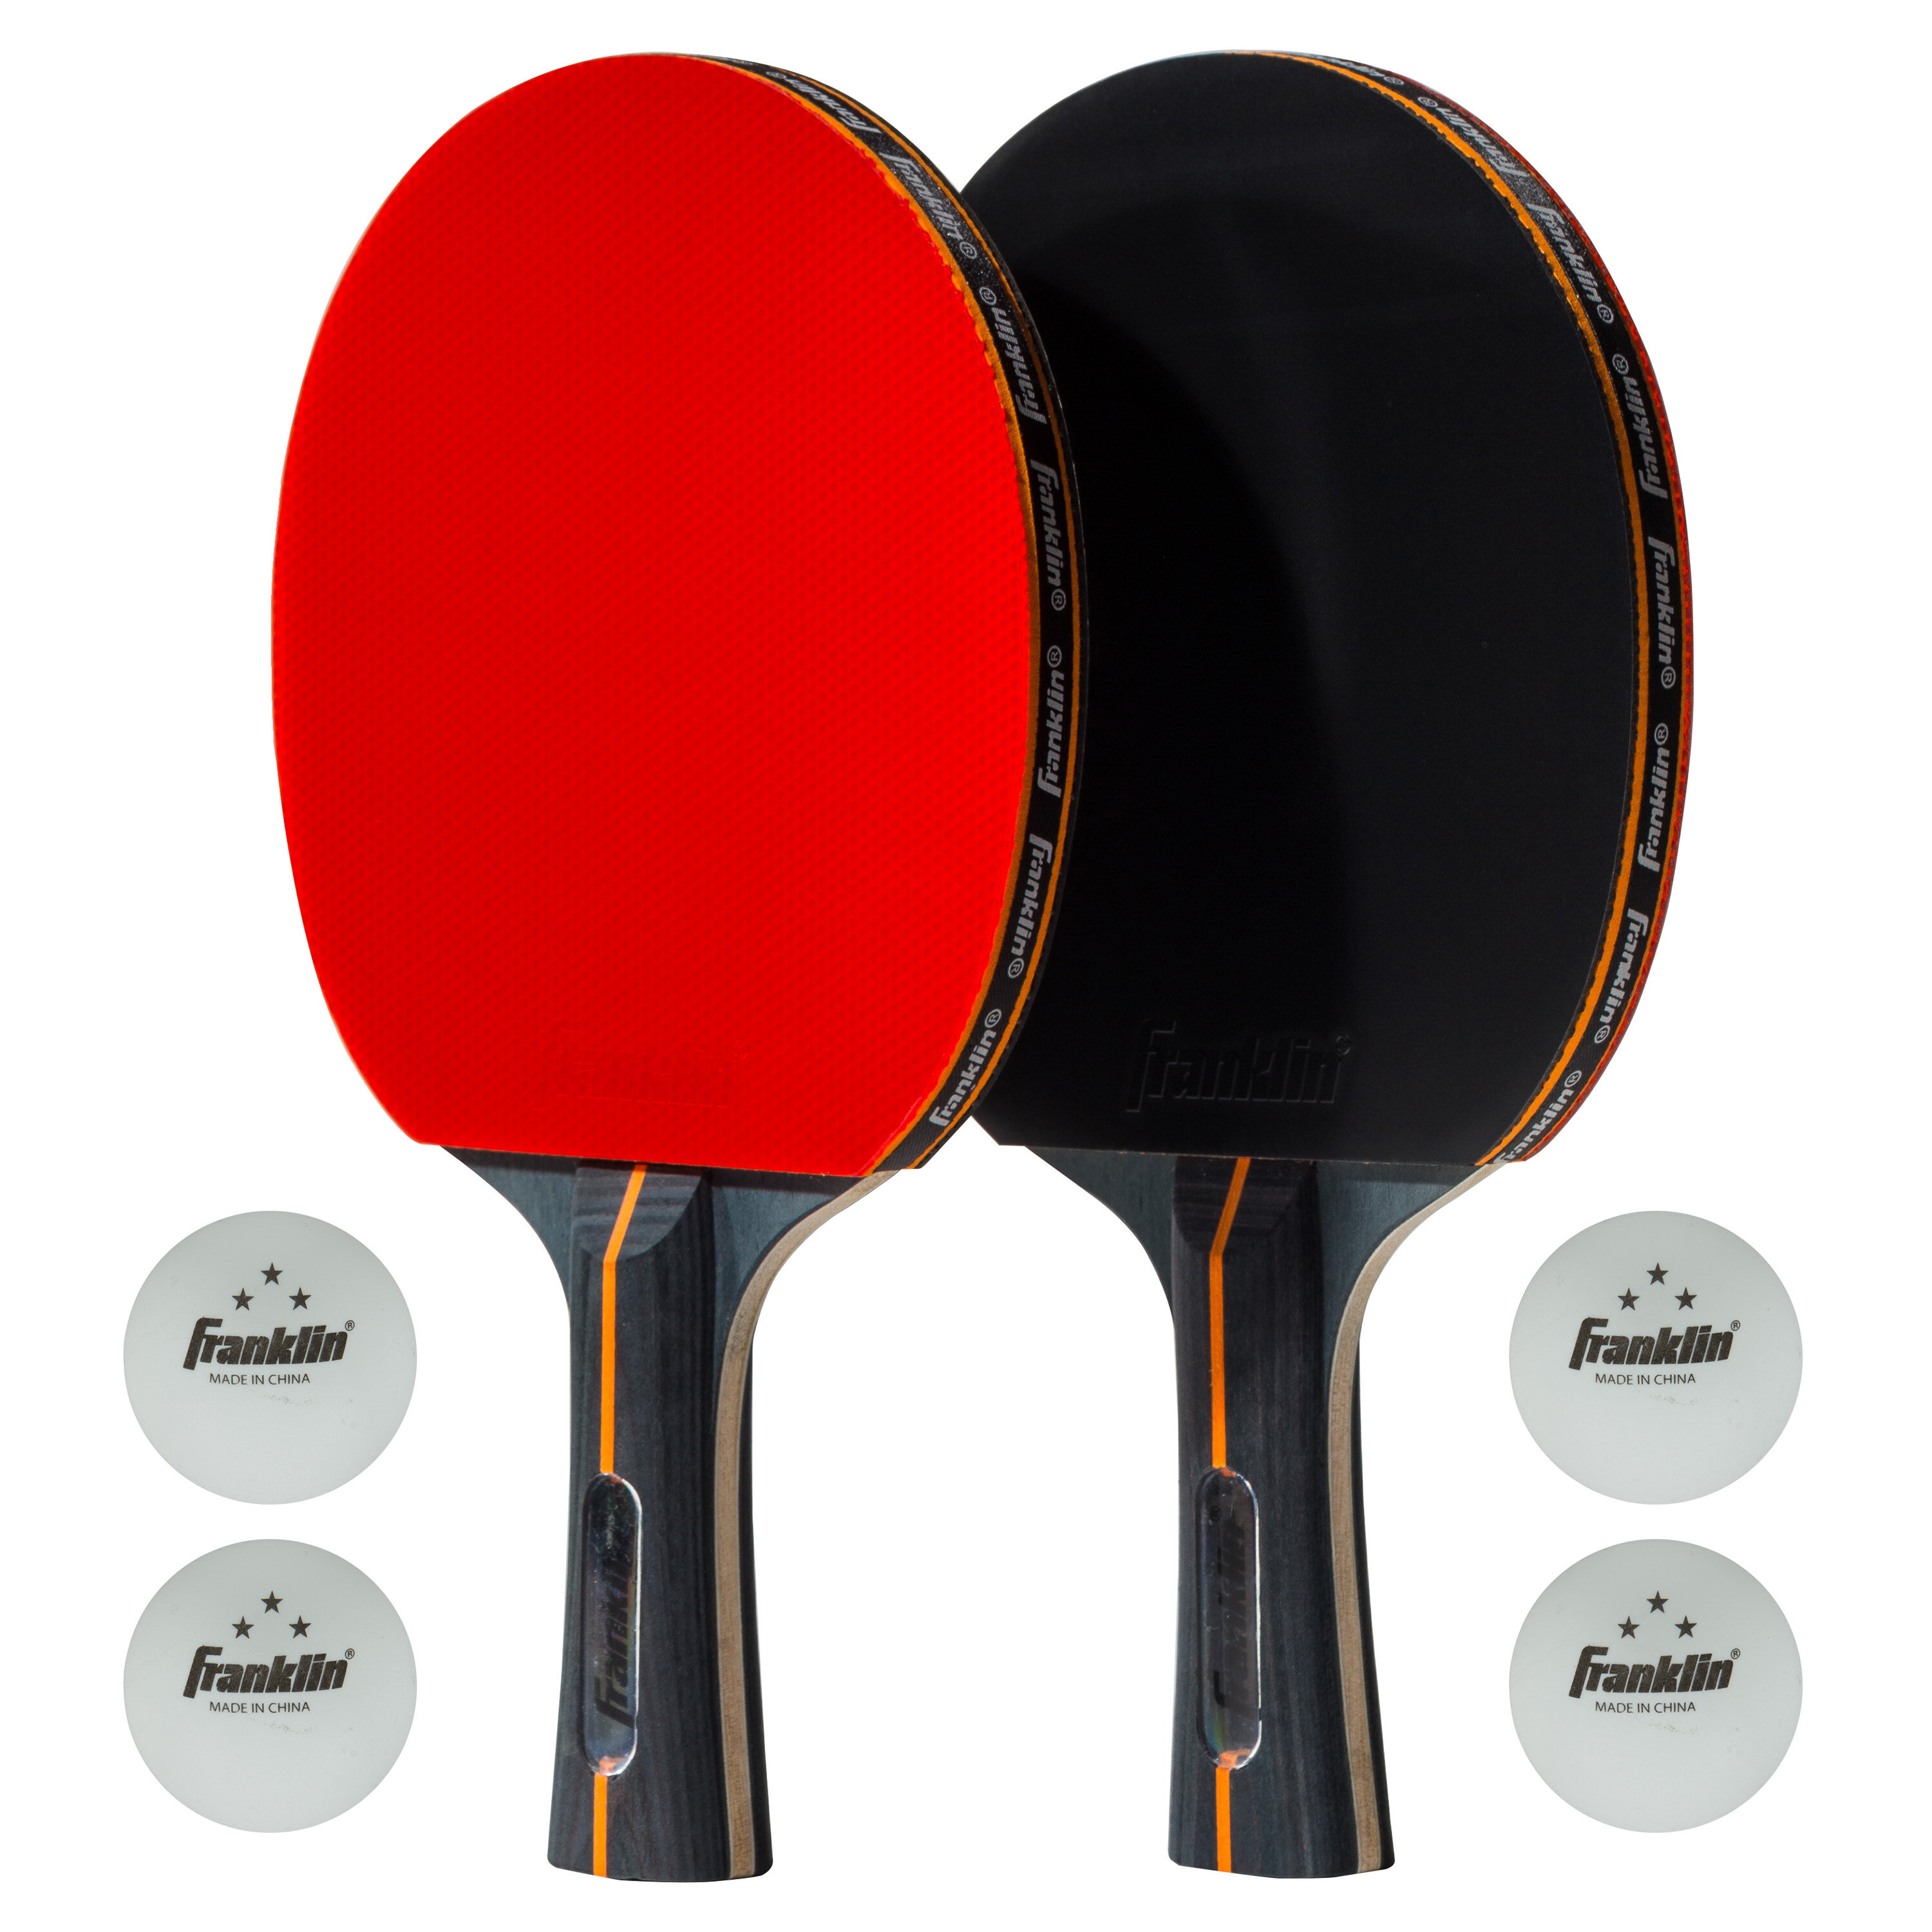 Viper Leading Edge 4 Star Table Tennis Ping Pong Racket Paddle for sale online 